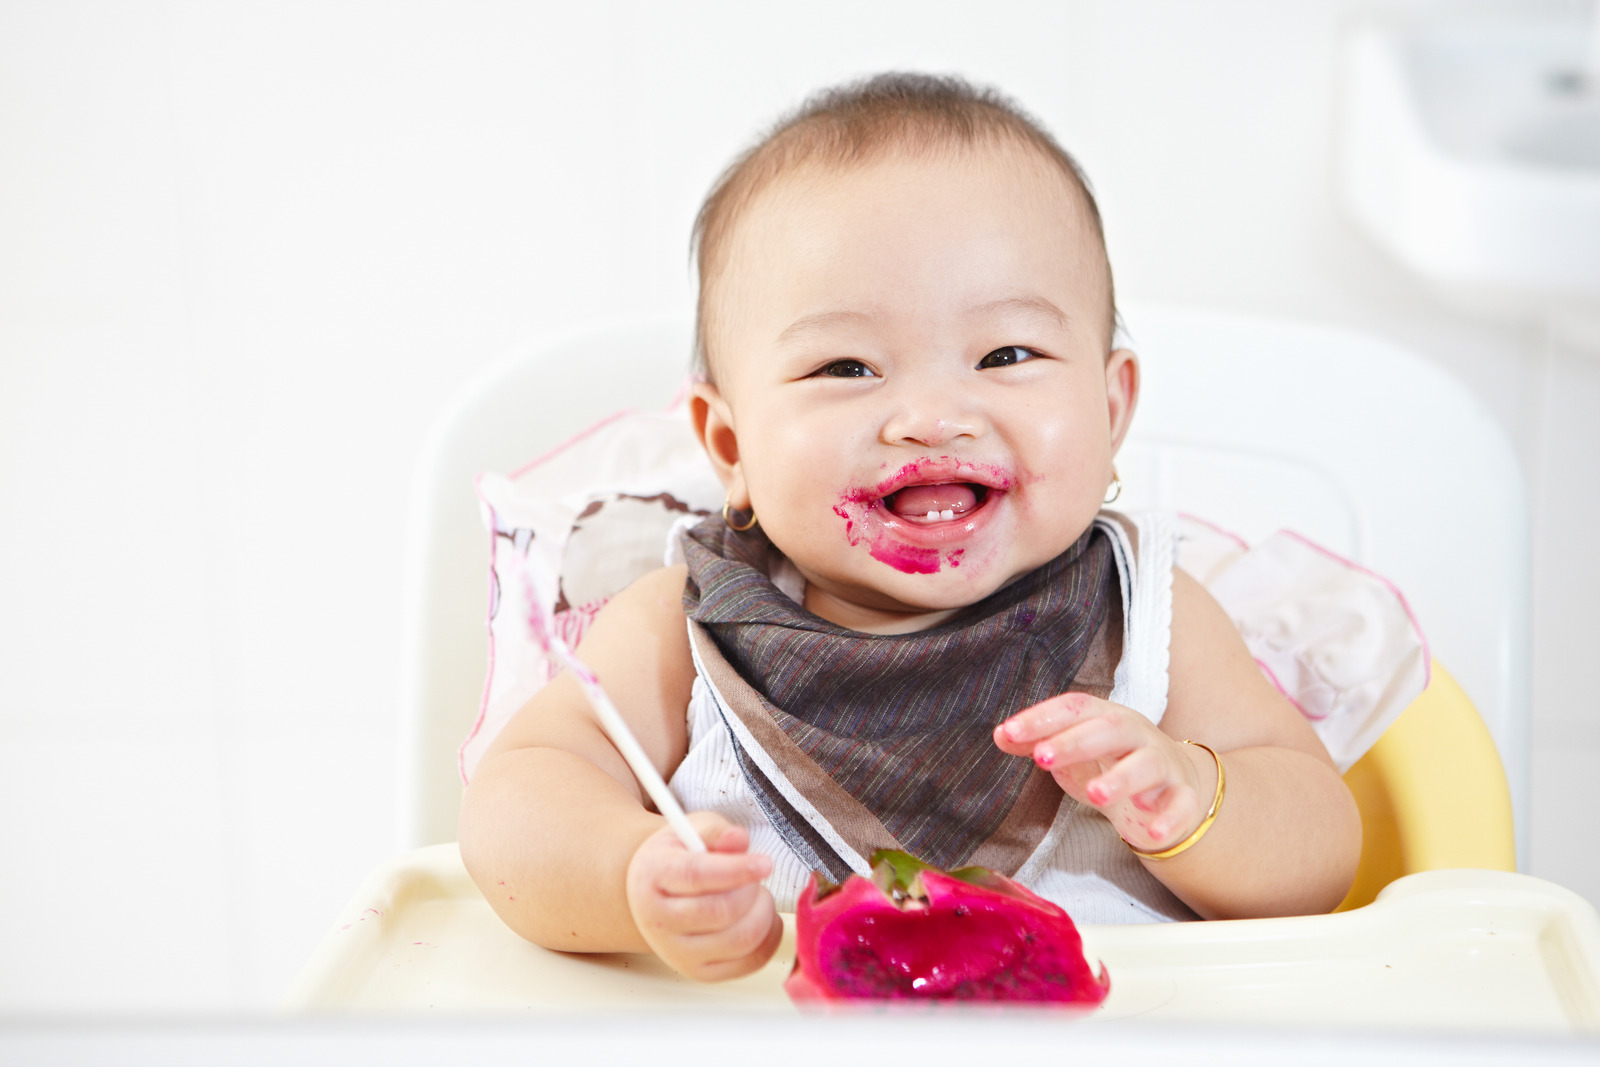 How Much Should My Baby Eat? - SleepBaby.org